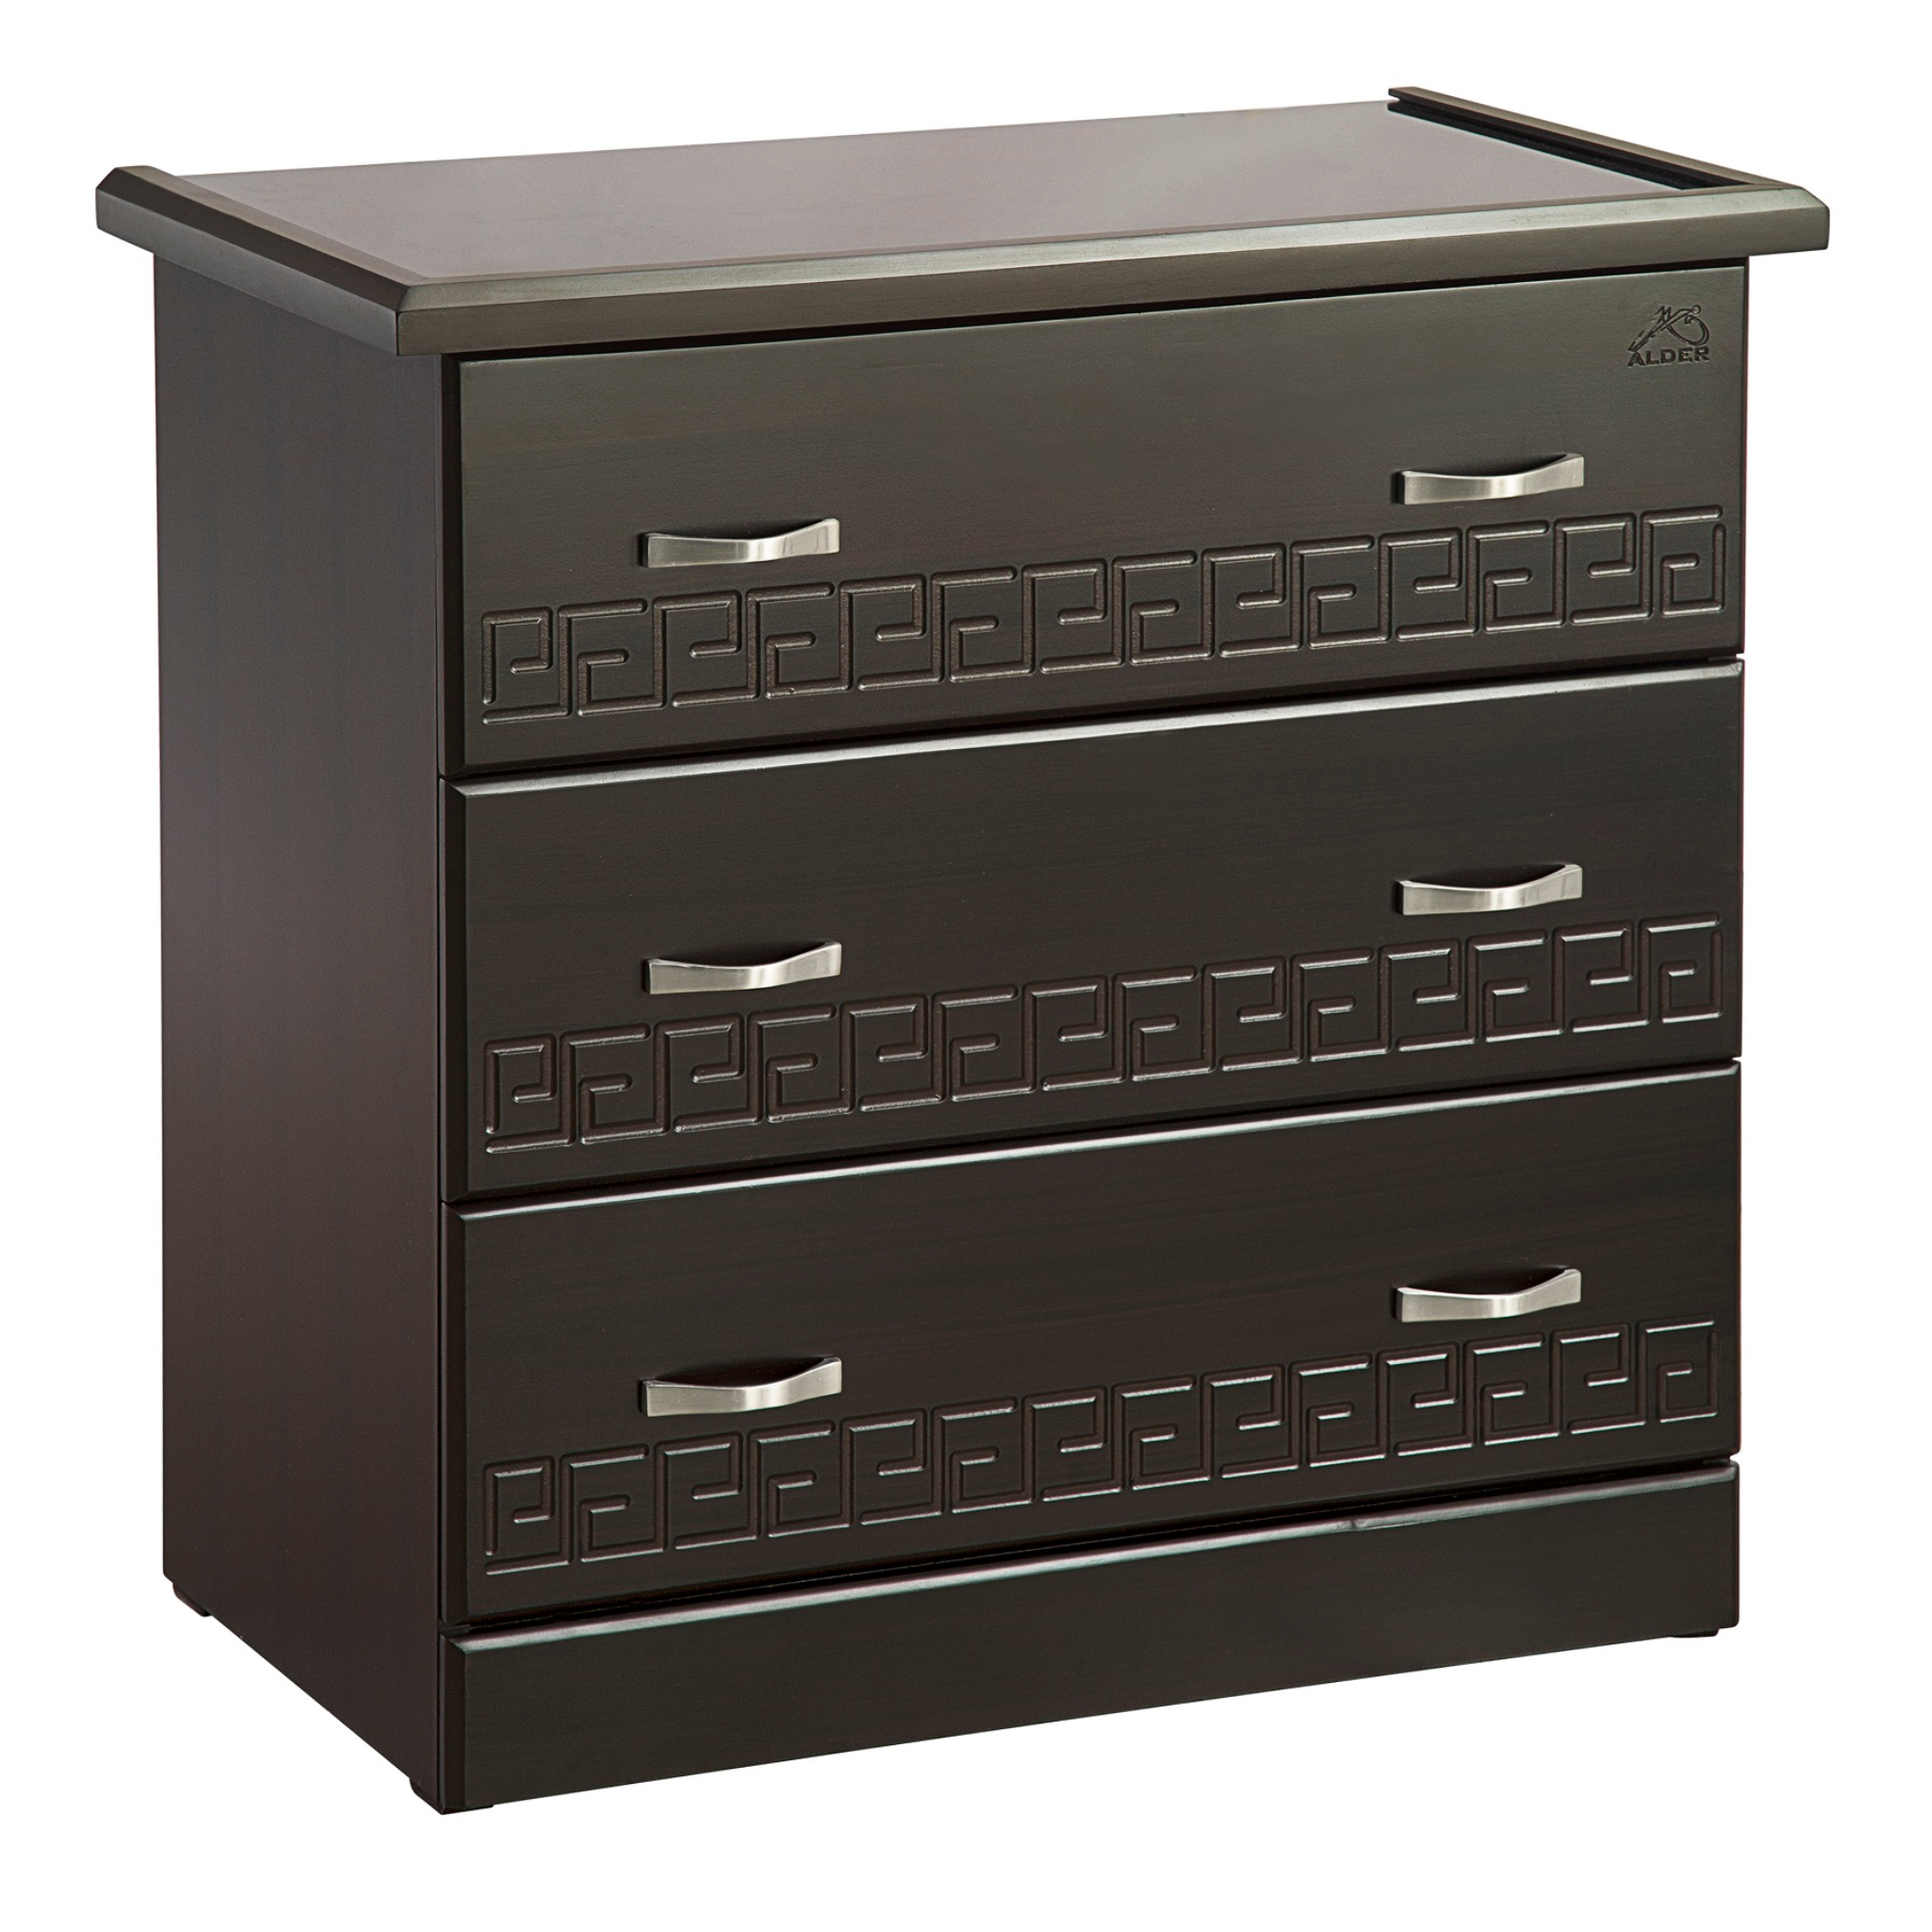 Multiutility Cabinets - 3 DR